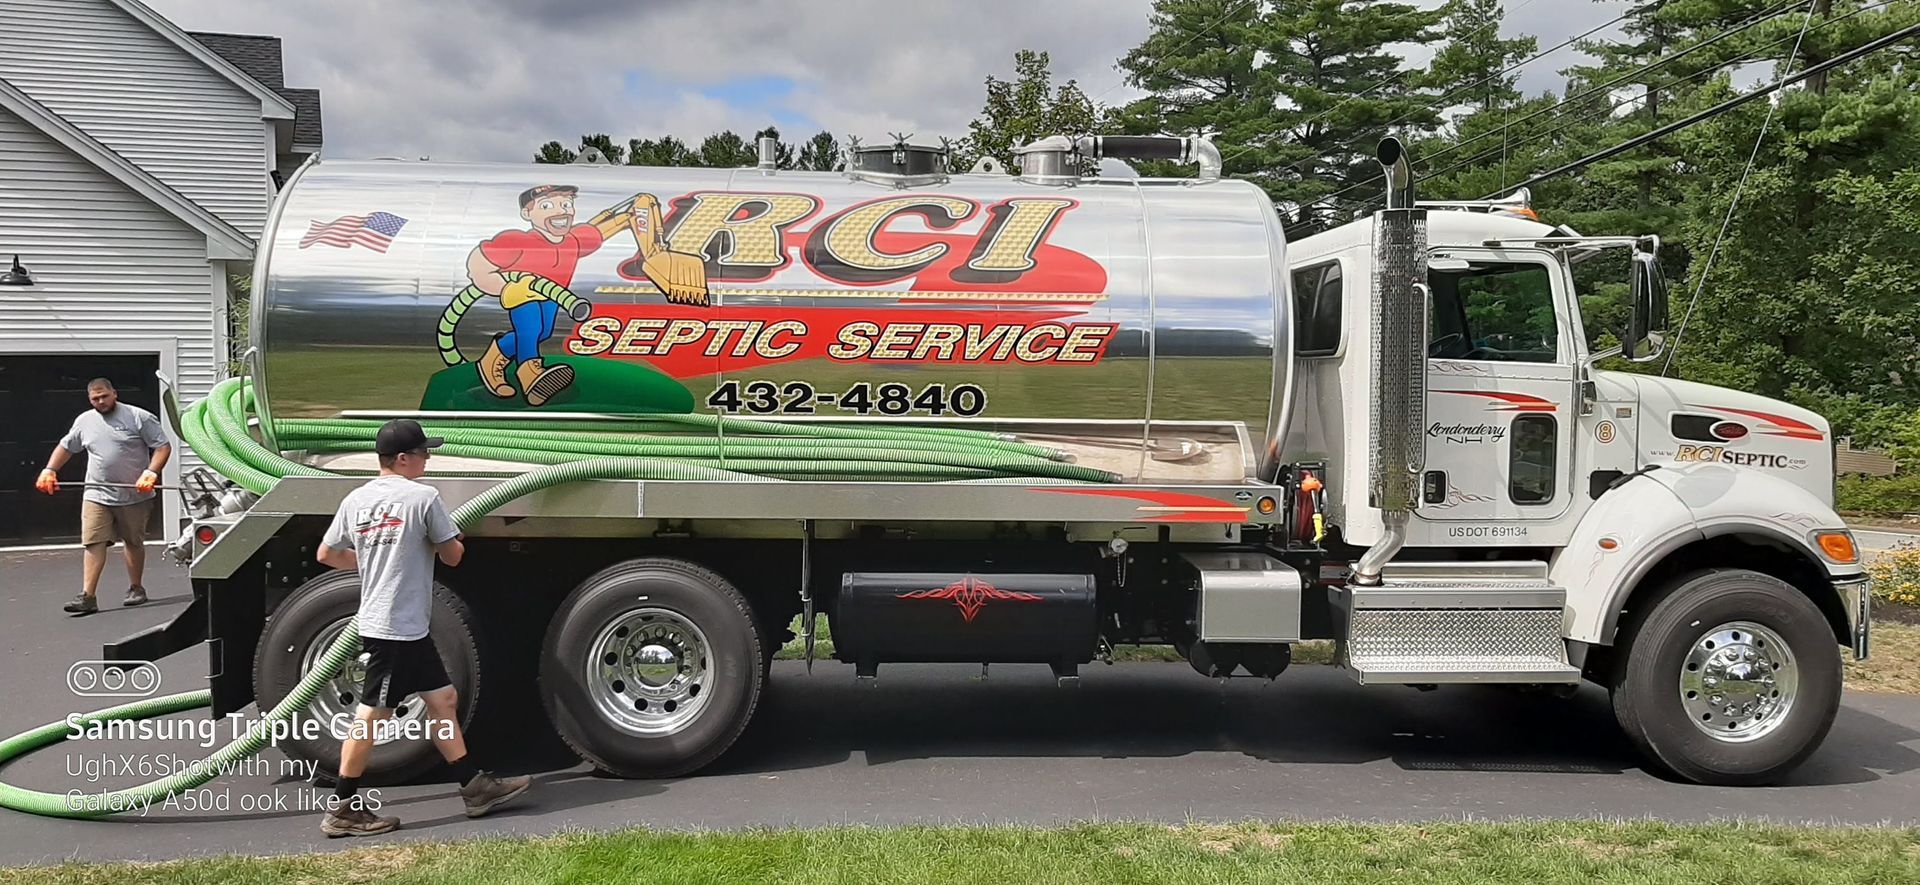 septic clean out service RCI Septic Service truck